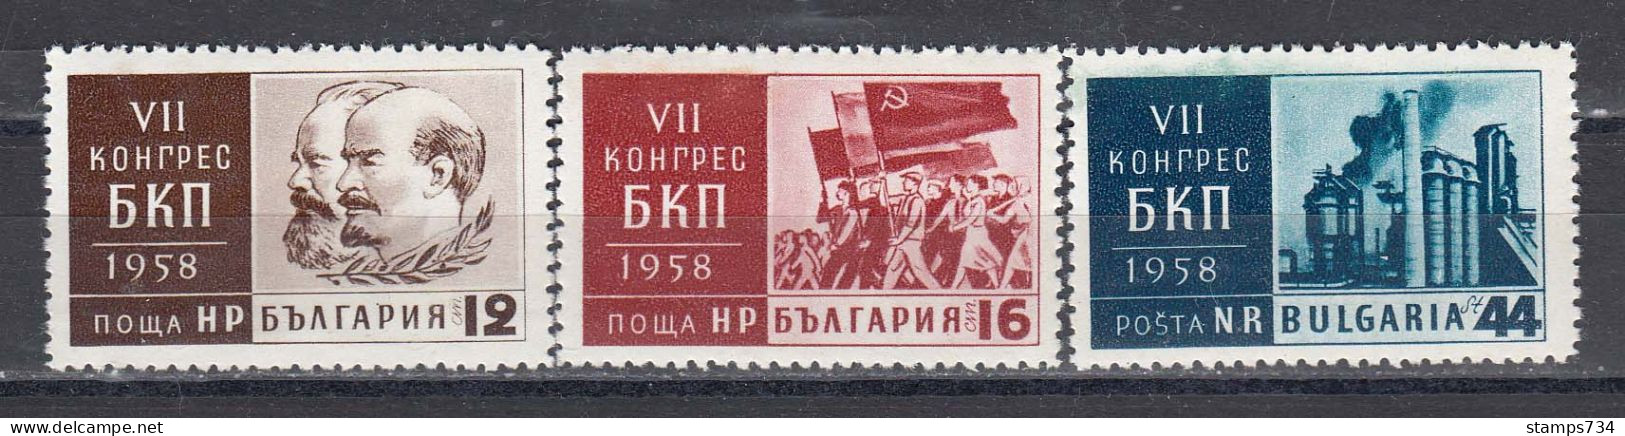 Bulgaria 1958 - 7th Congress Of The Bulgarian Communist Party, Mi-Nr. 1064/66, MNH** - Unused Stamps